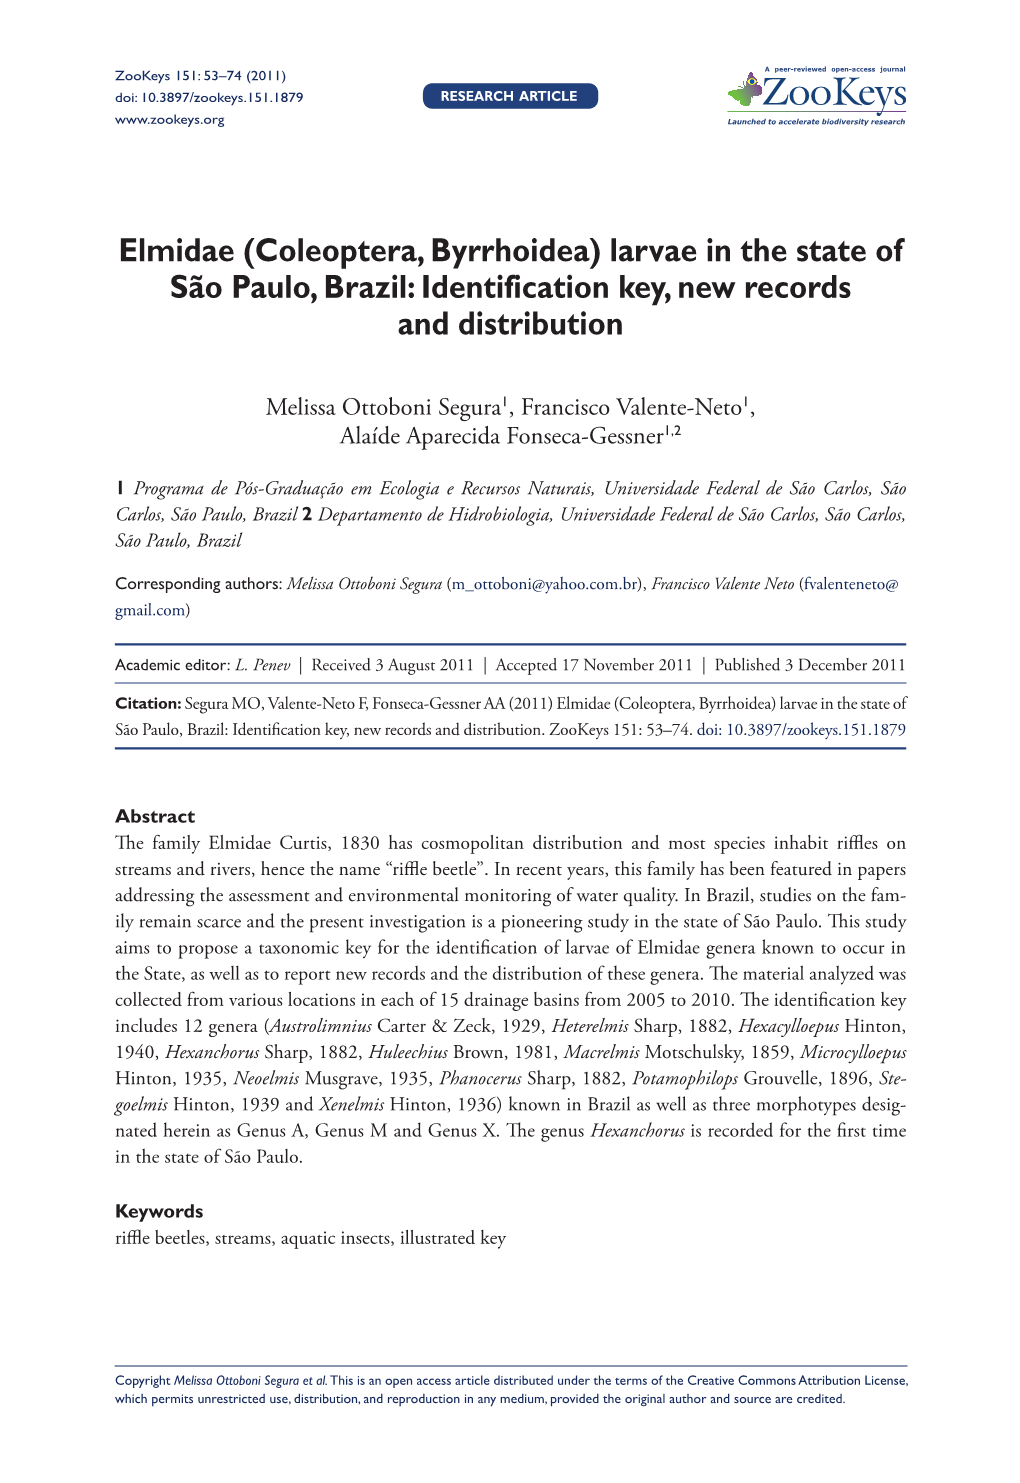 Elmidae (Coleoptera, Byrrhoidea) Larvae in the State of São Paulo, Brazil: Identification Key, New Records and Distribution